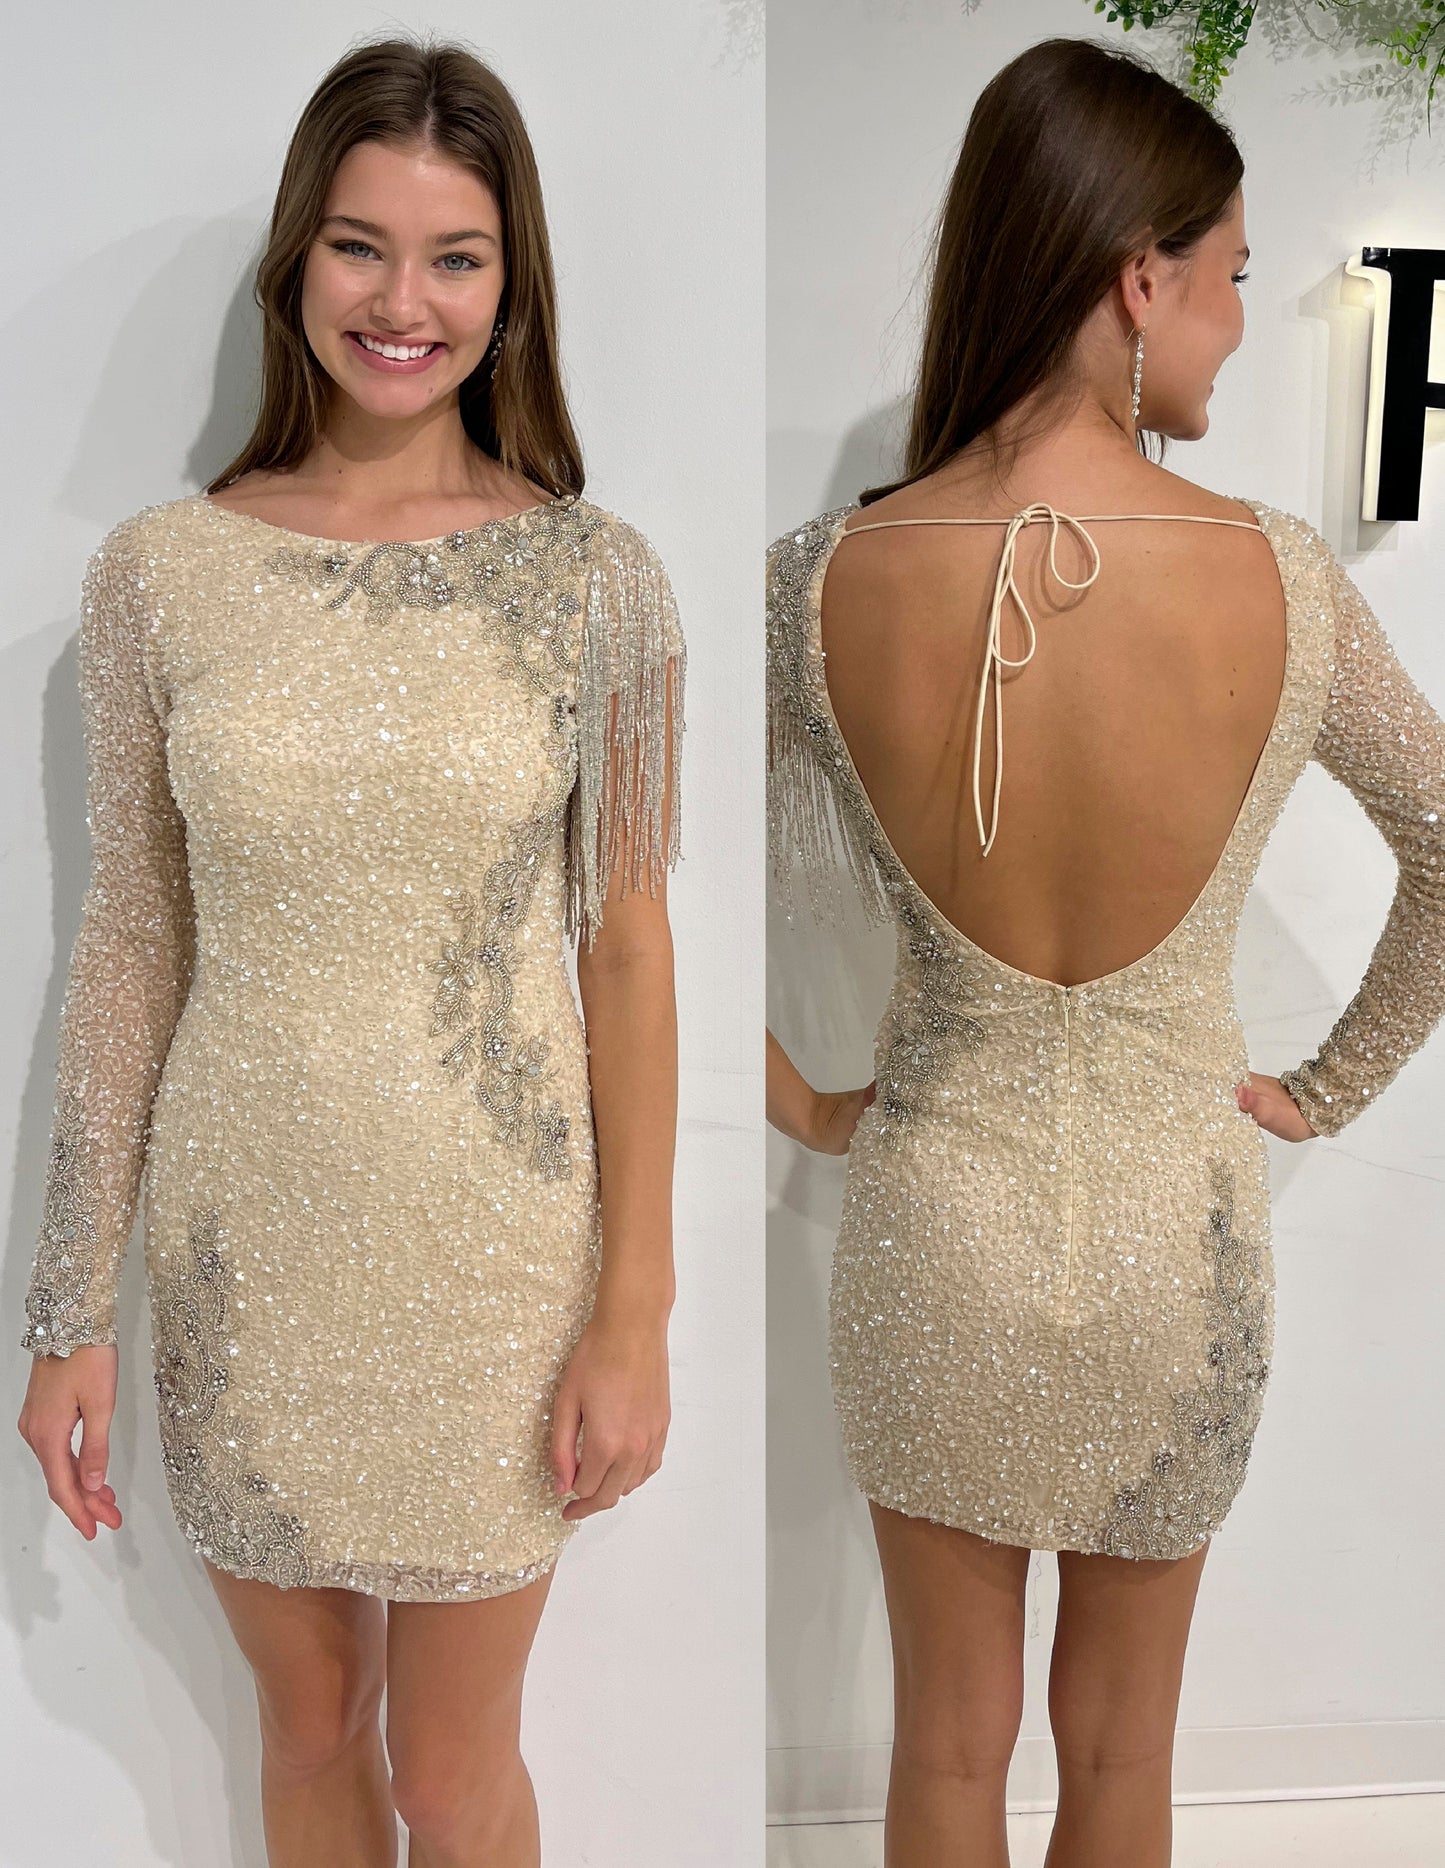 Primavera Couture 3842 Size 12 Mint Short Homecoming dress Fitted sequin beaded short cocktail dress